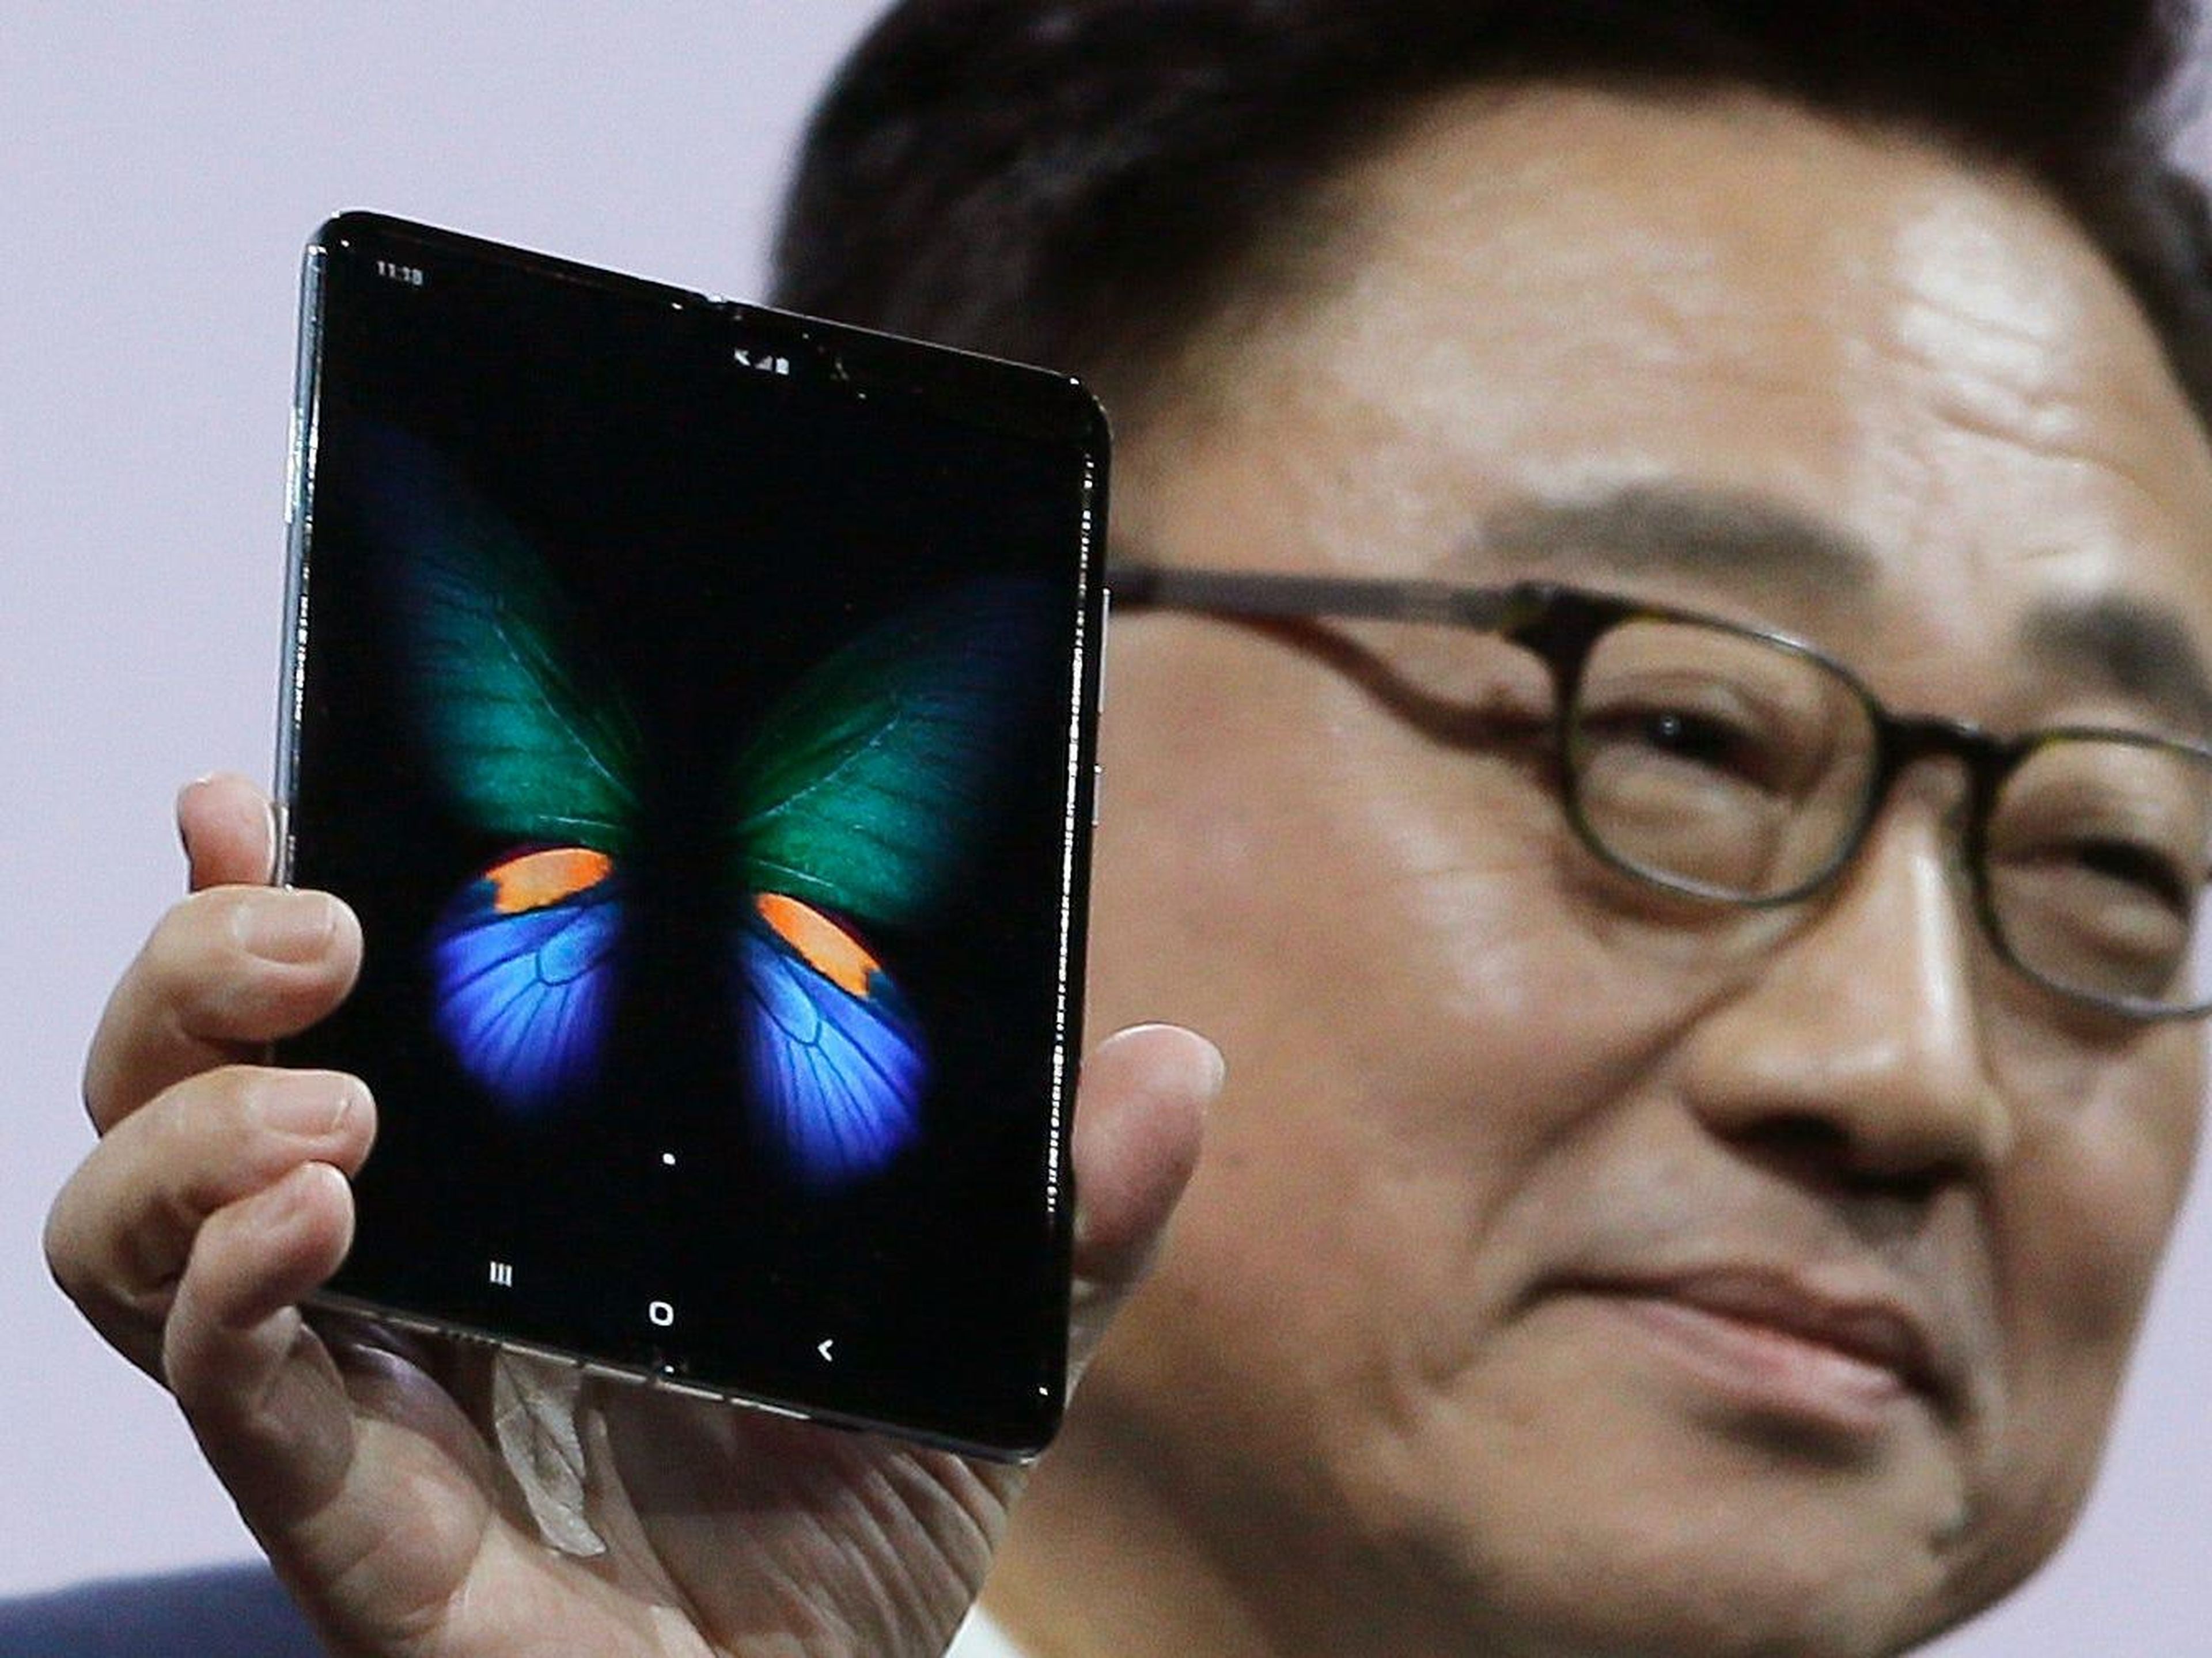 Samsung's $2,000 foldable phone is reportedly getting a successor, and we just got our first look in a major leak